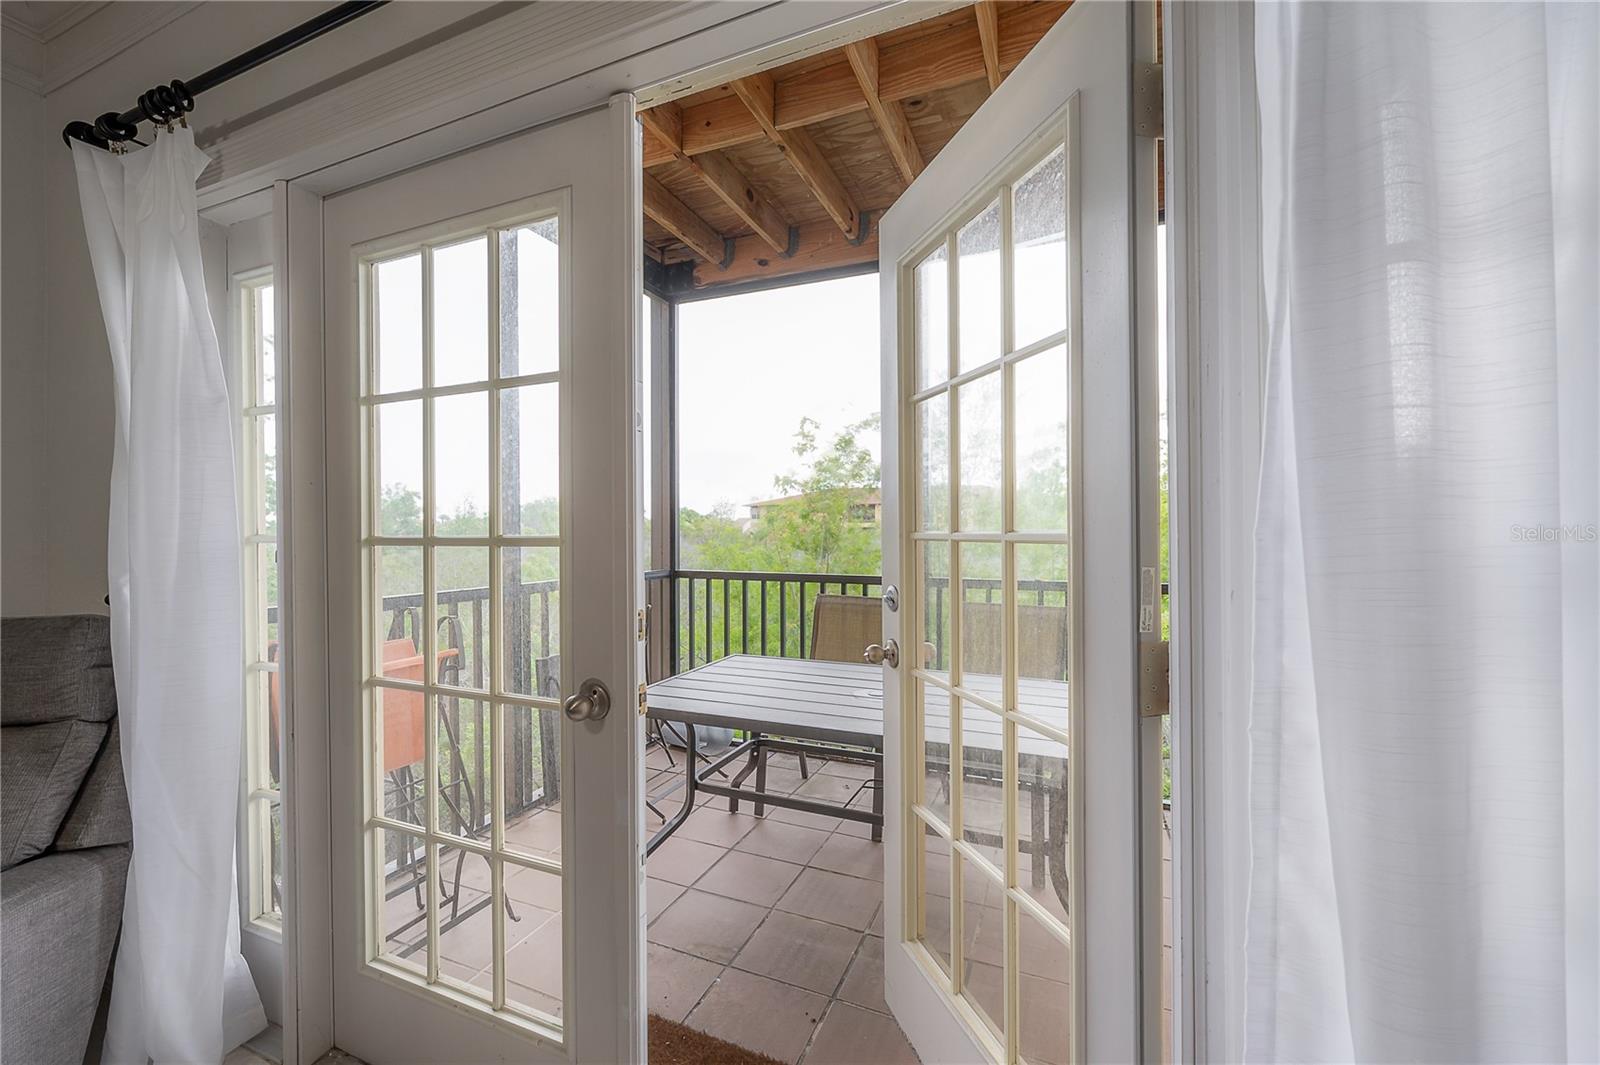 French doors opening to the balcony